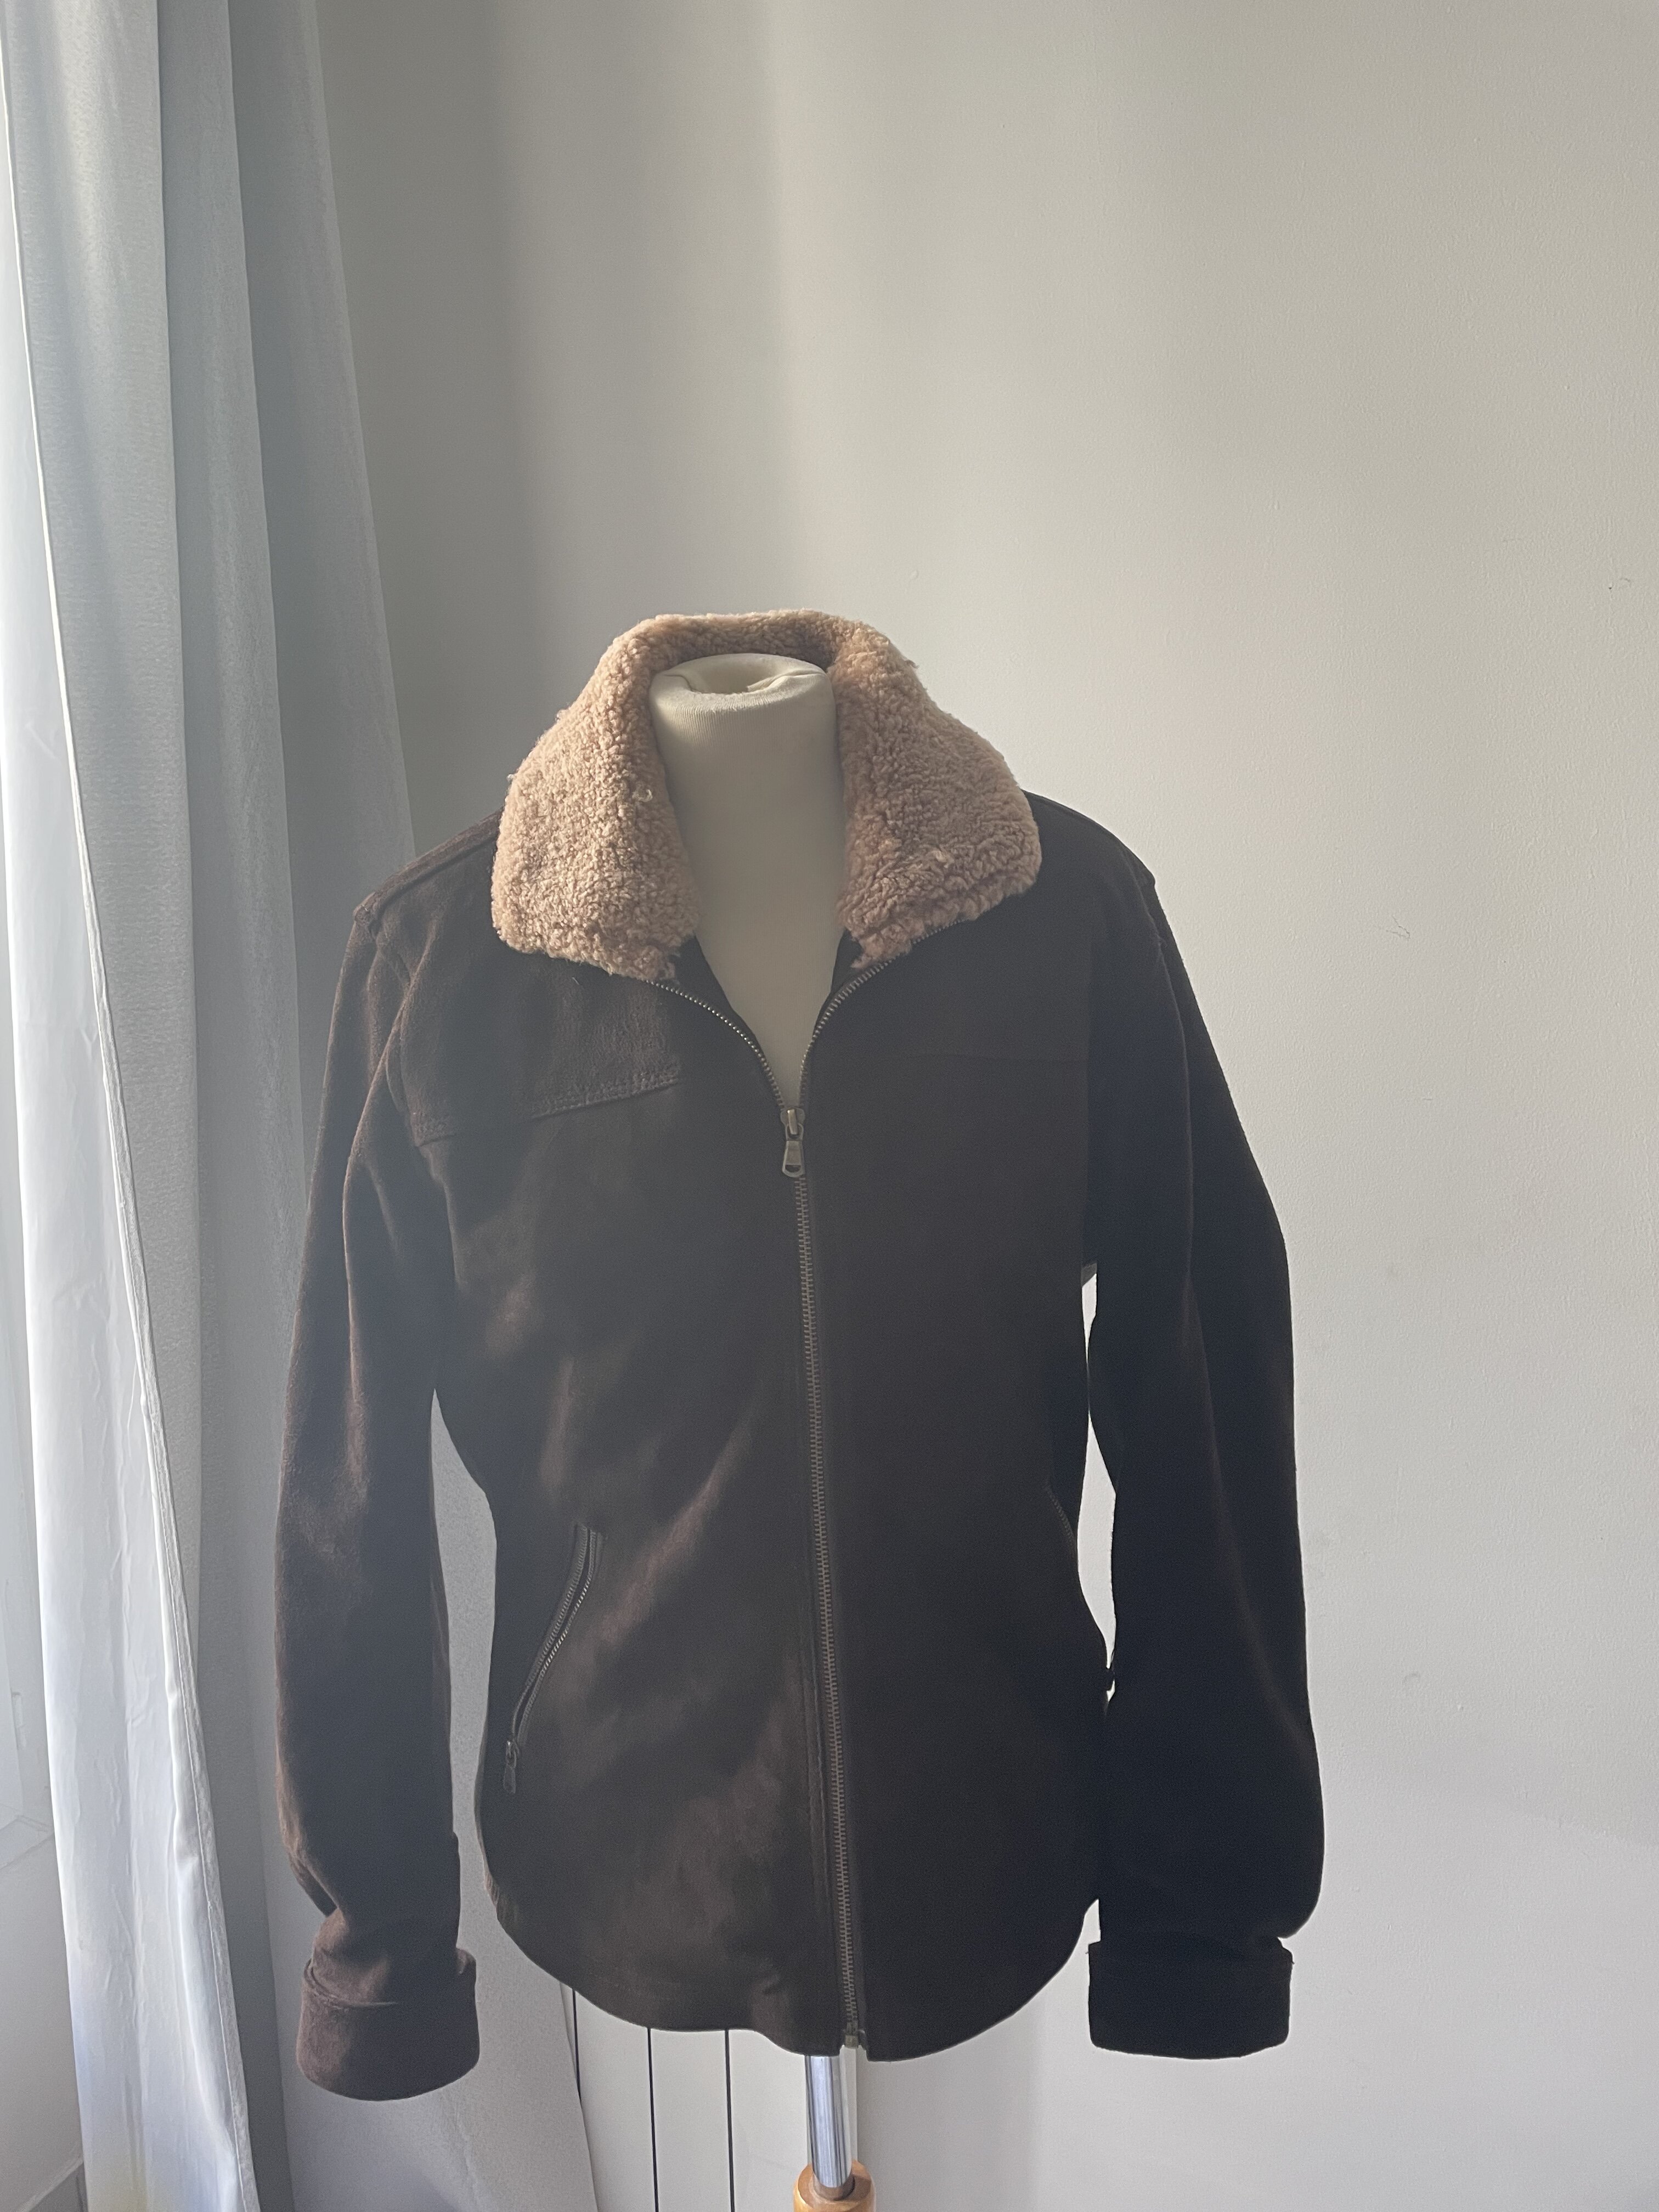 Walking Dead Rick Jacket | Page 55 | RPF Costume and Prop Maker Community